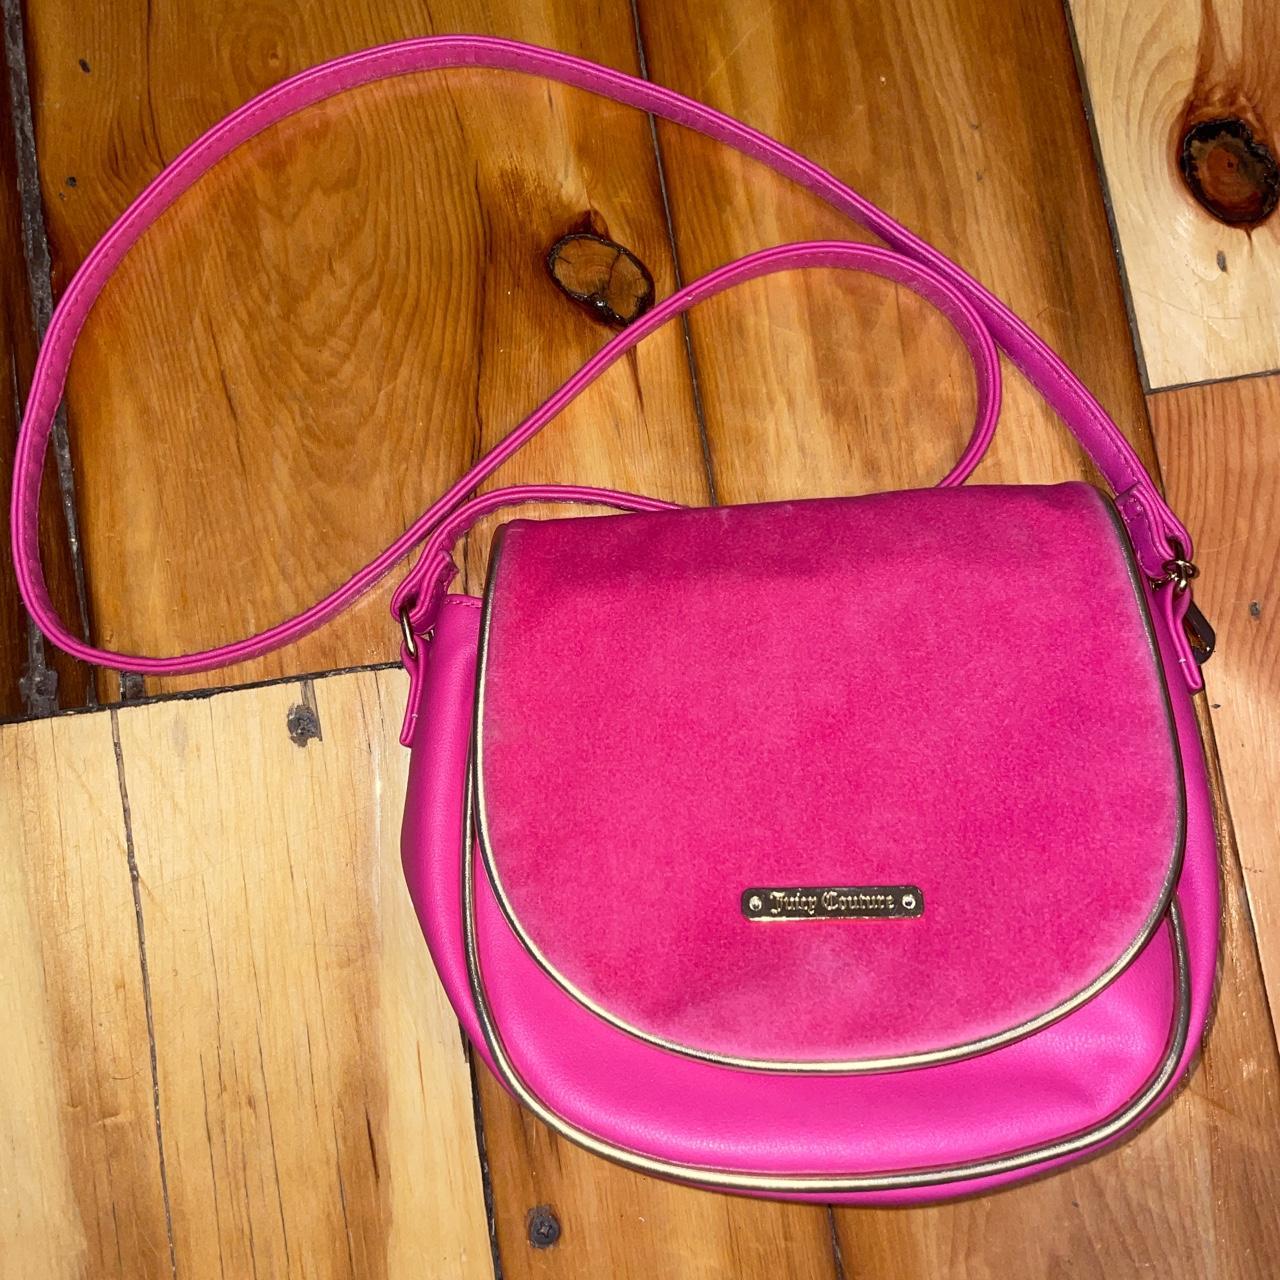 Purse juicy couture - general for sale - by owner - craigslist